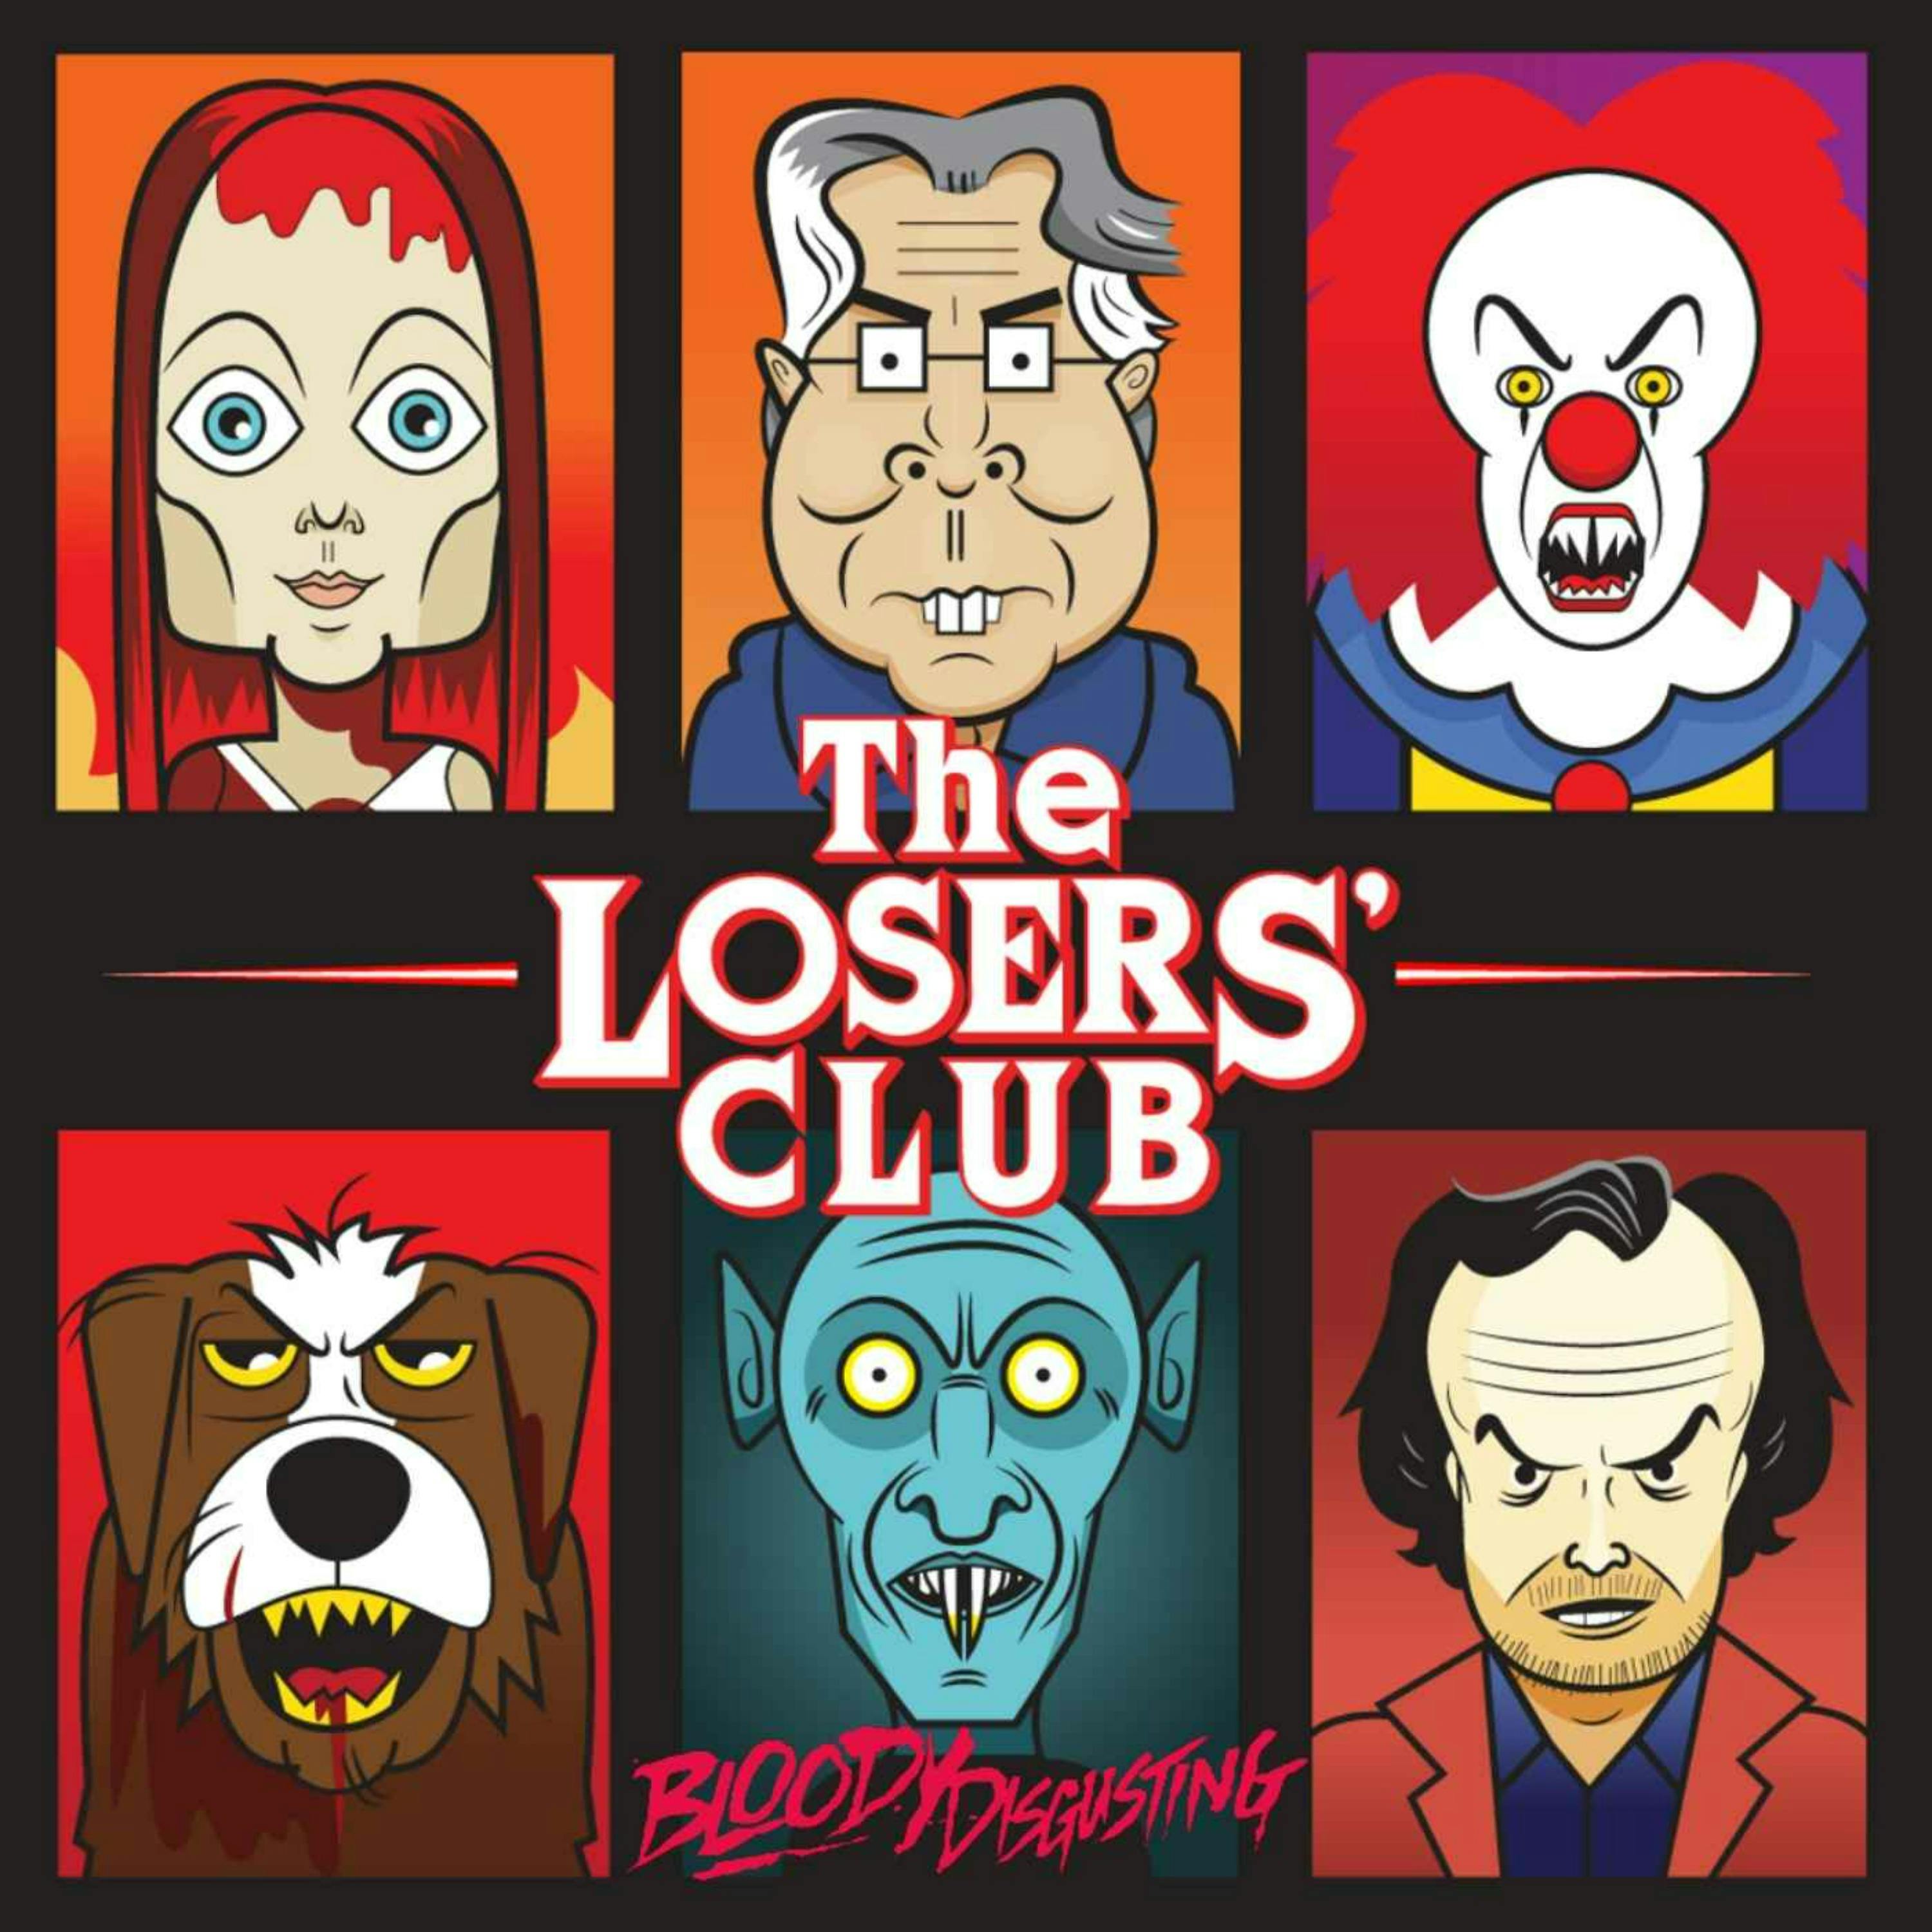 The Losers’ Club: Stephen King Interview